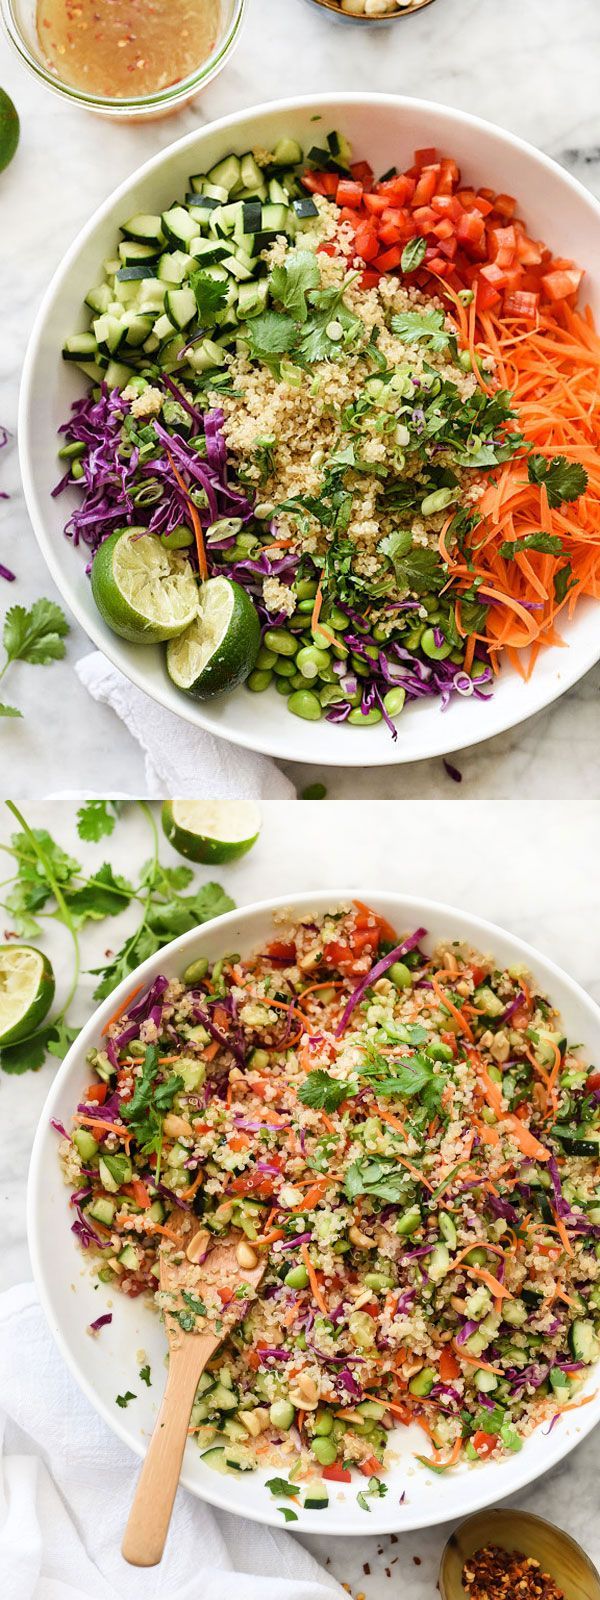 Thai Quinoa Salad – This gluten-free, veg heavy, protein packed salad is one of my new favorite sides and easy to make as a main